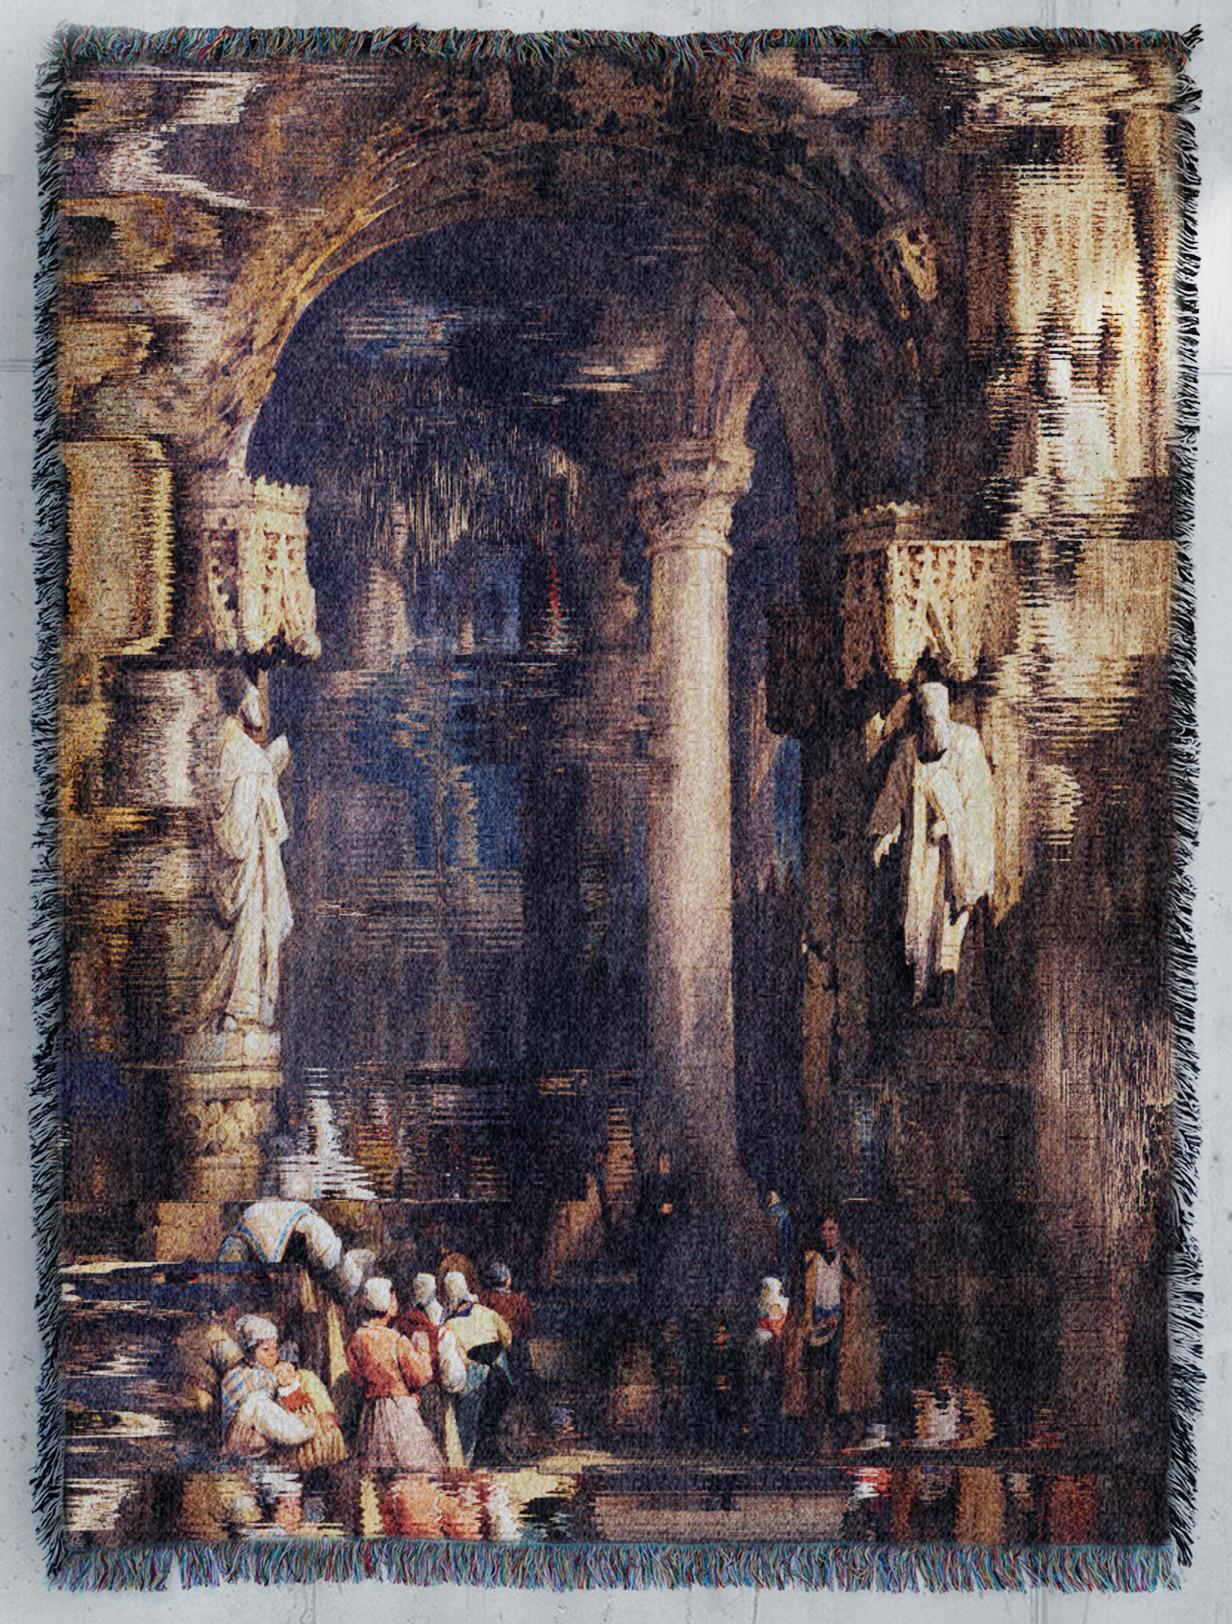 Memories of “Interior Of A Cathedral” by Samuel Prout by Marco Salvi - Print by Unknown